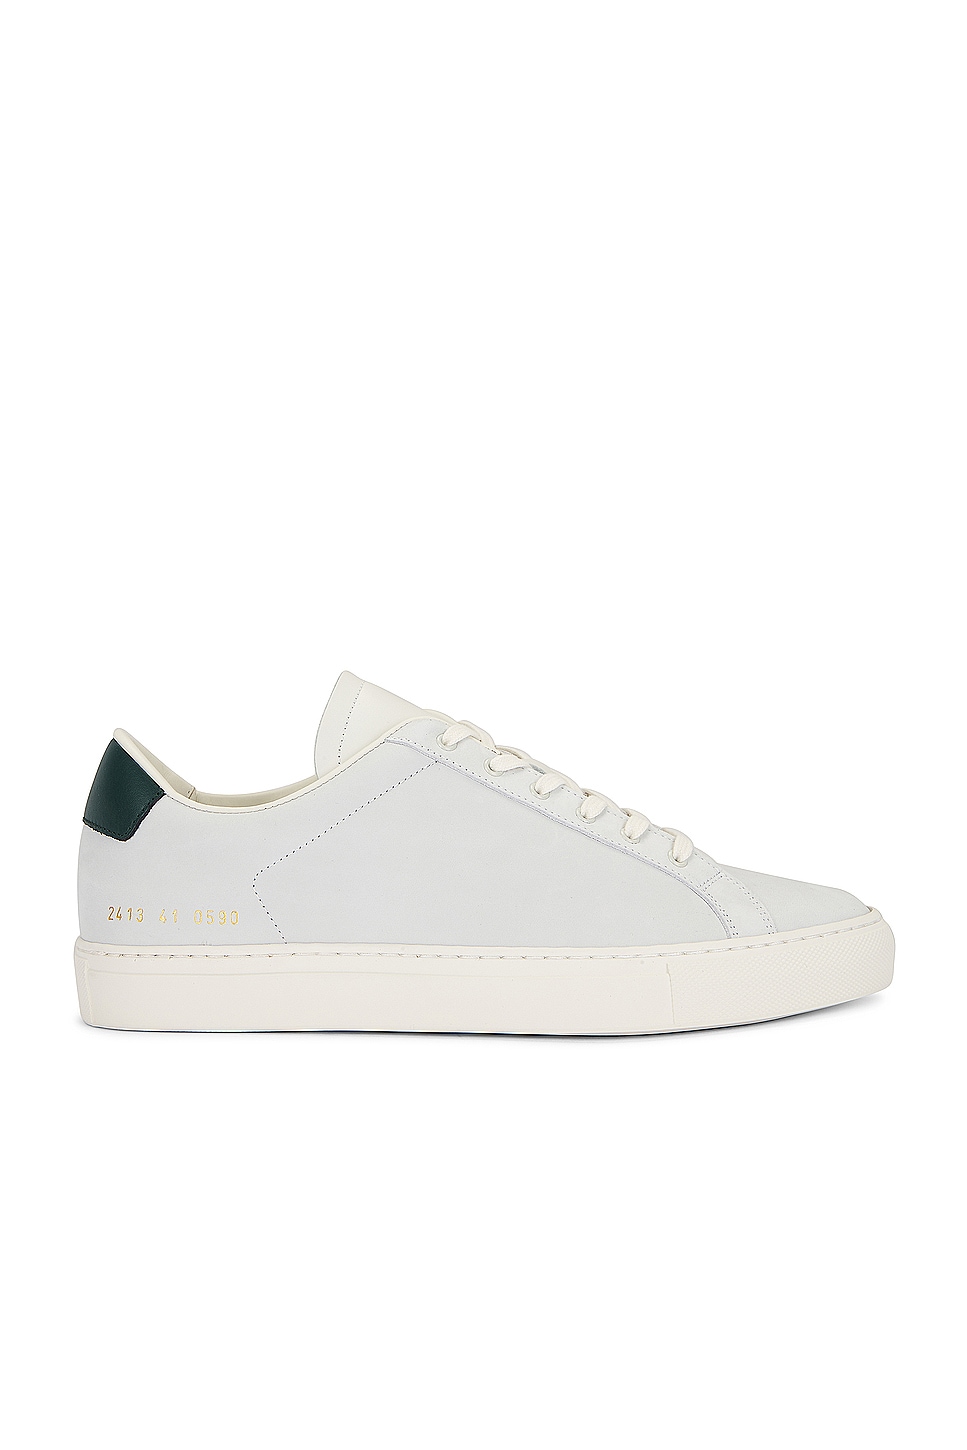 Image 1 of Common Projects Retro Sneaker in White & Green